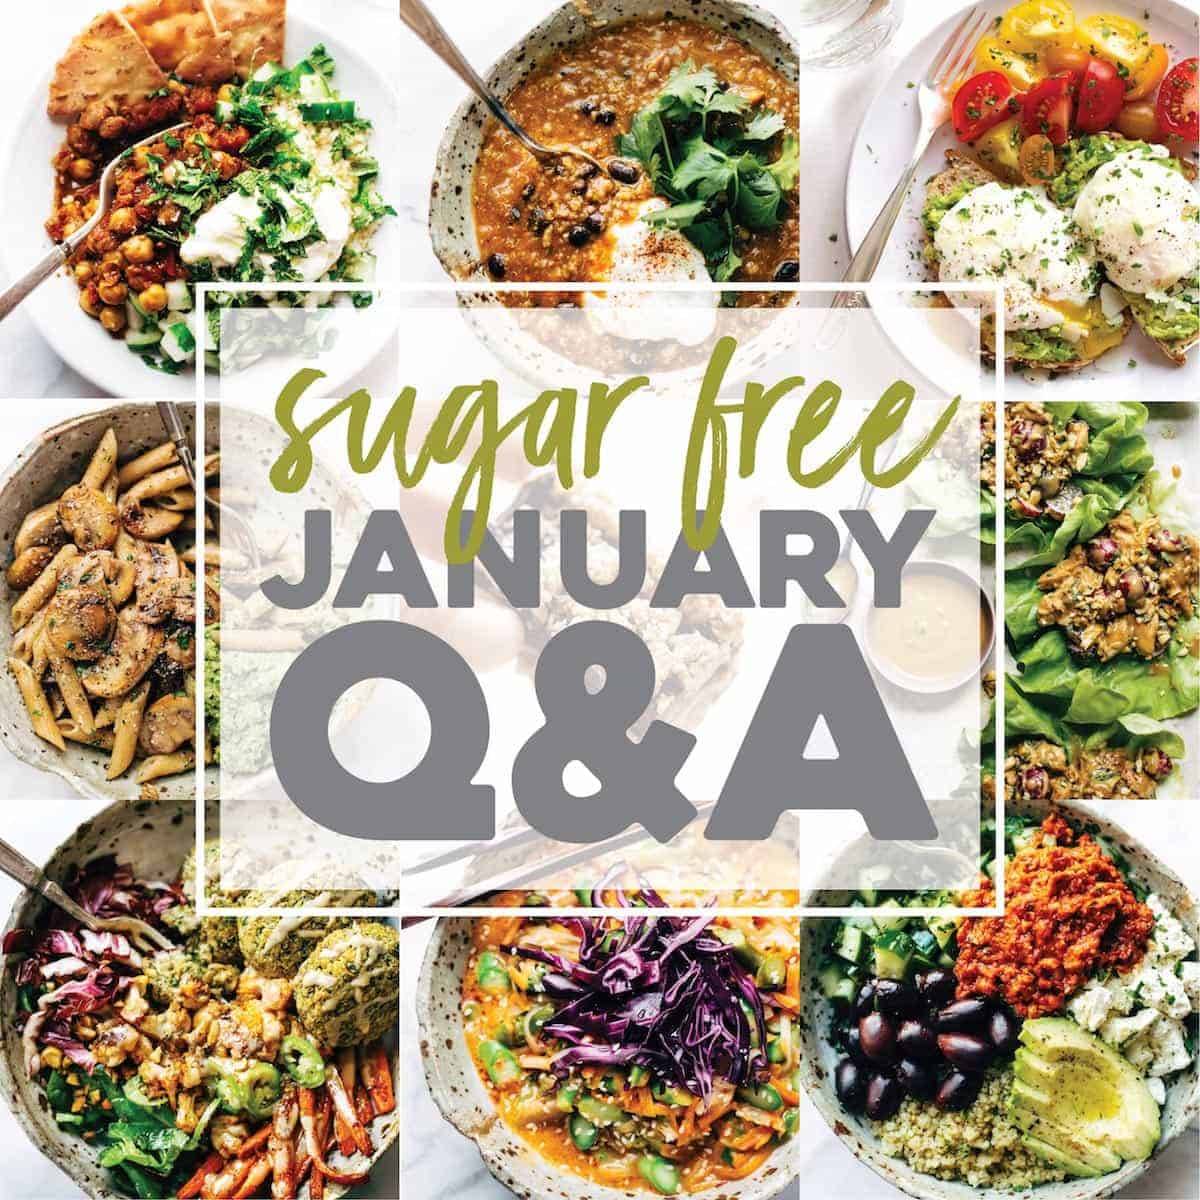 Question and Answers about Sugar free January recipes.